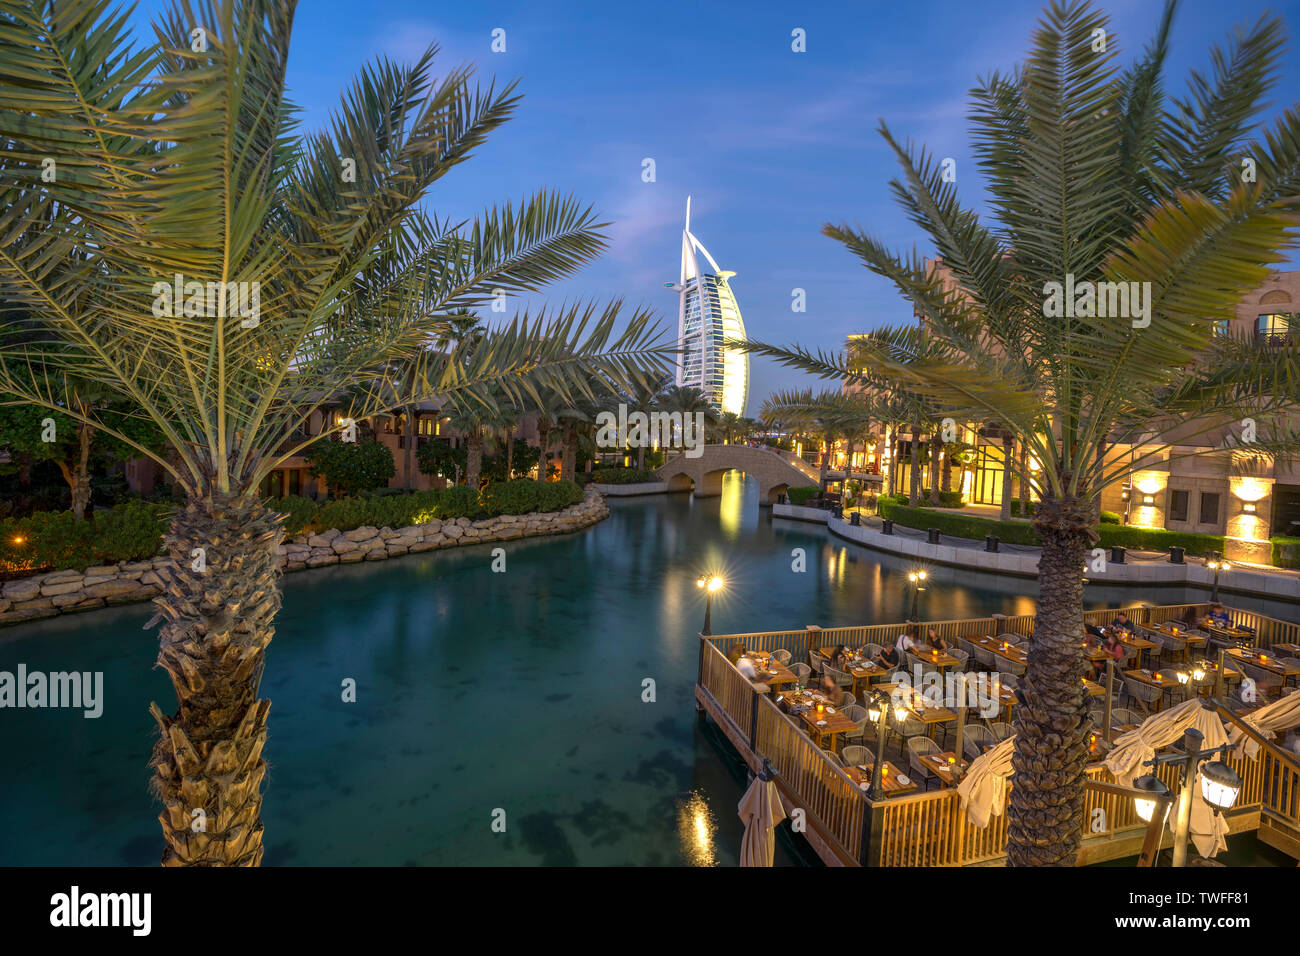 The beautiful waterfront of Souk Madinat Jumeirah and the 7-star hotel Burj al Arab are framed by elegant palm trees in Dubai. Stock Photo